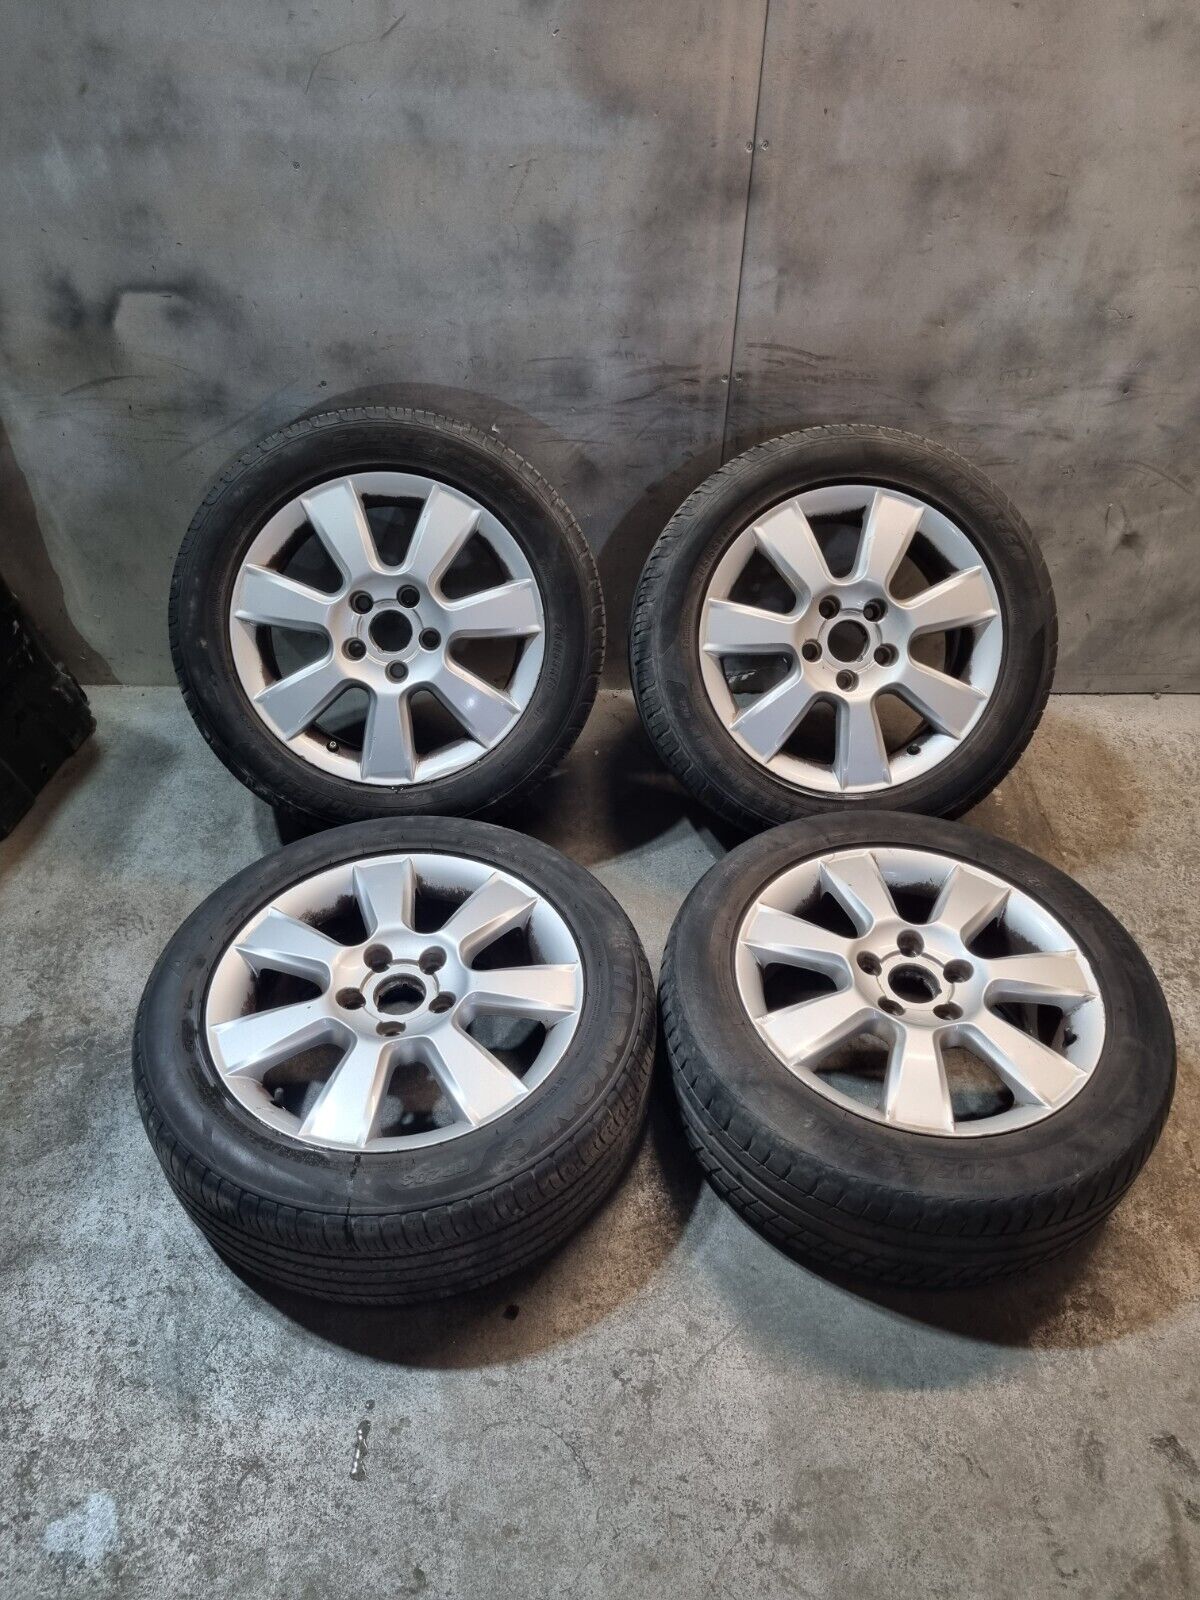 SEAT LEON 16 INCH ALLOY WHEELS  WITH TYRES  1P0601025G 2005-2012